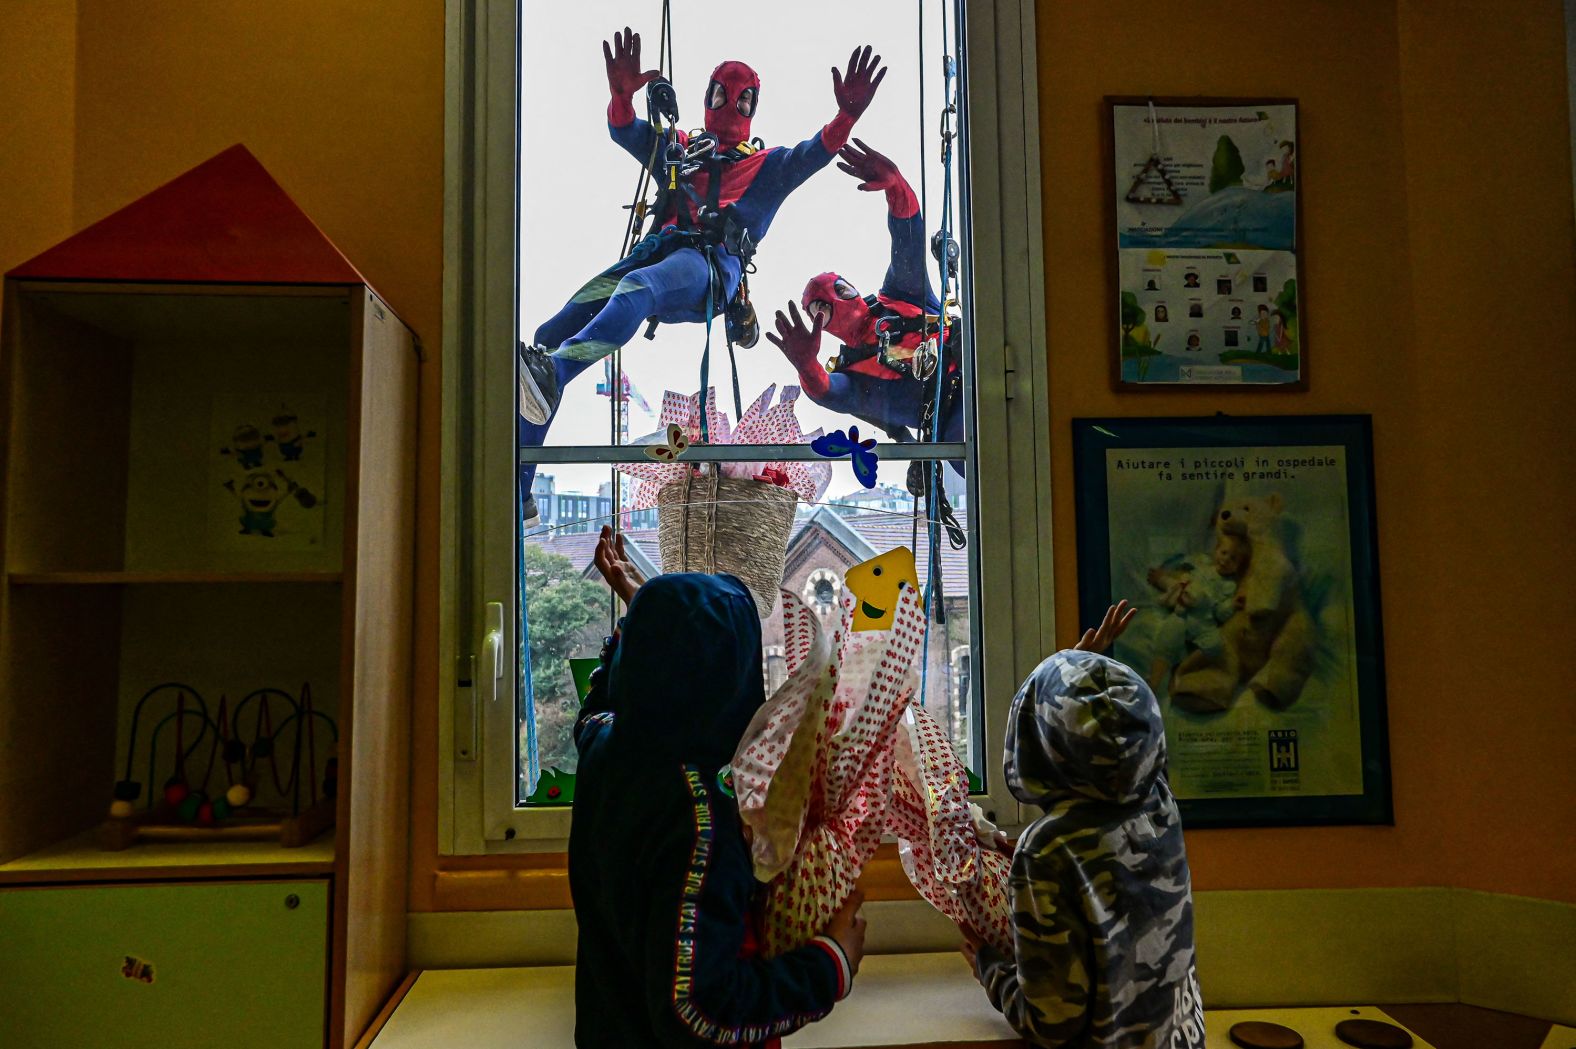 People dressed as Spider-Man deliver Easter eggs to children in the pediatric ward of the De Marchi clinic in Milan, Italy, on Thursday, March 28.